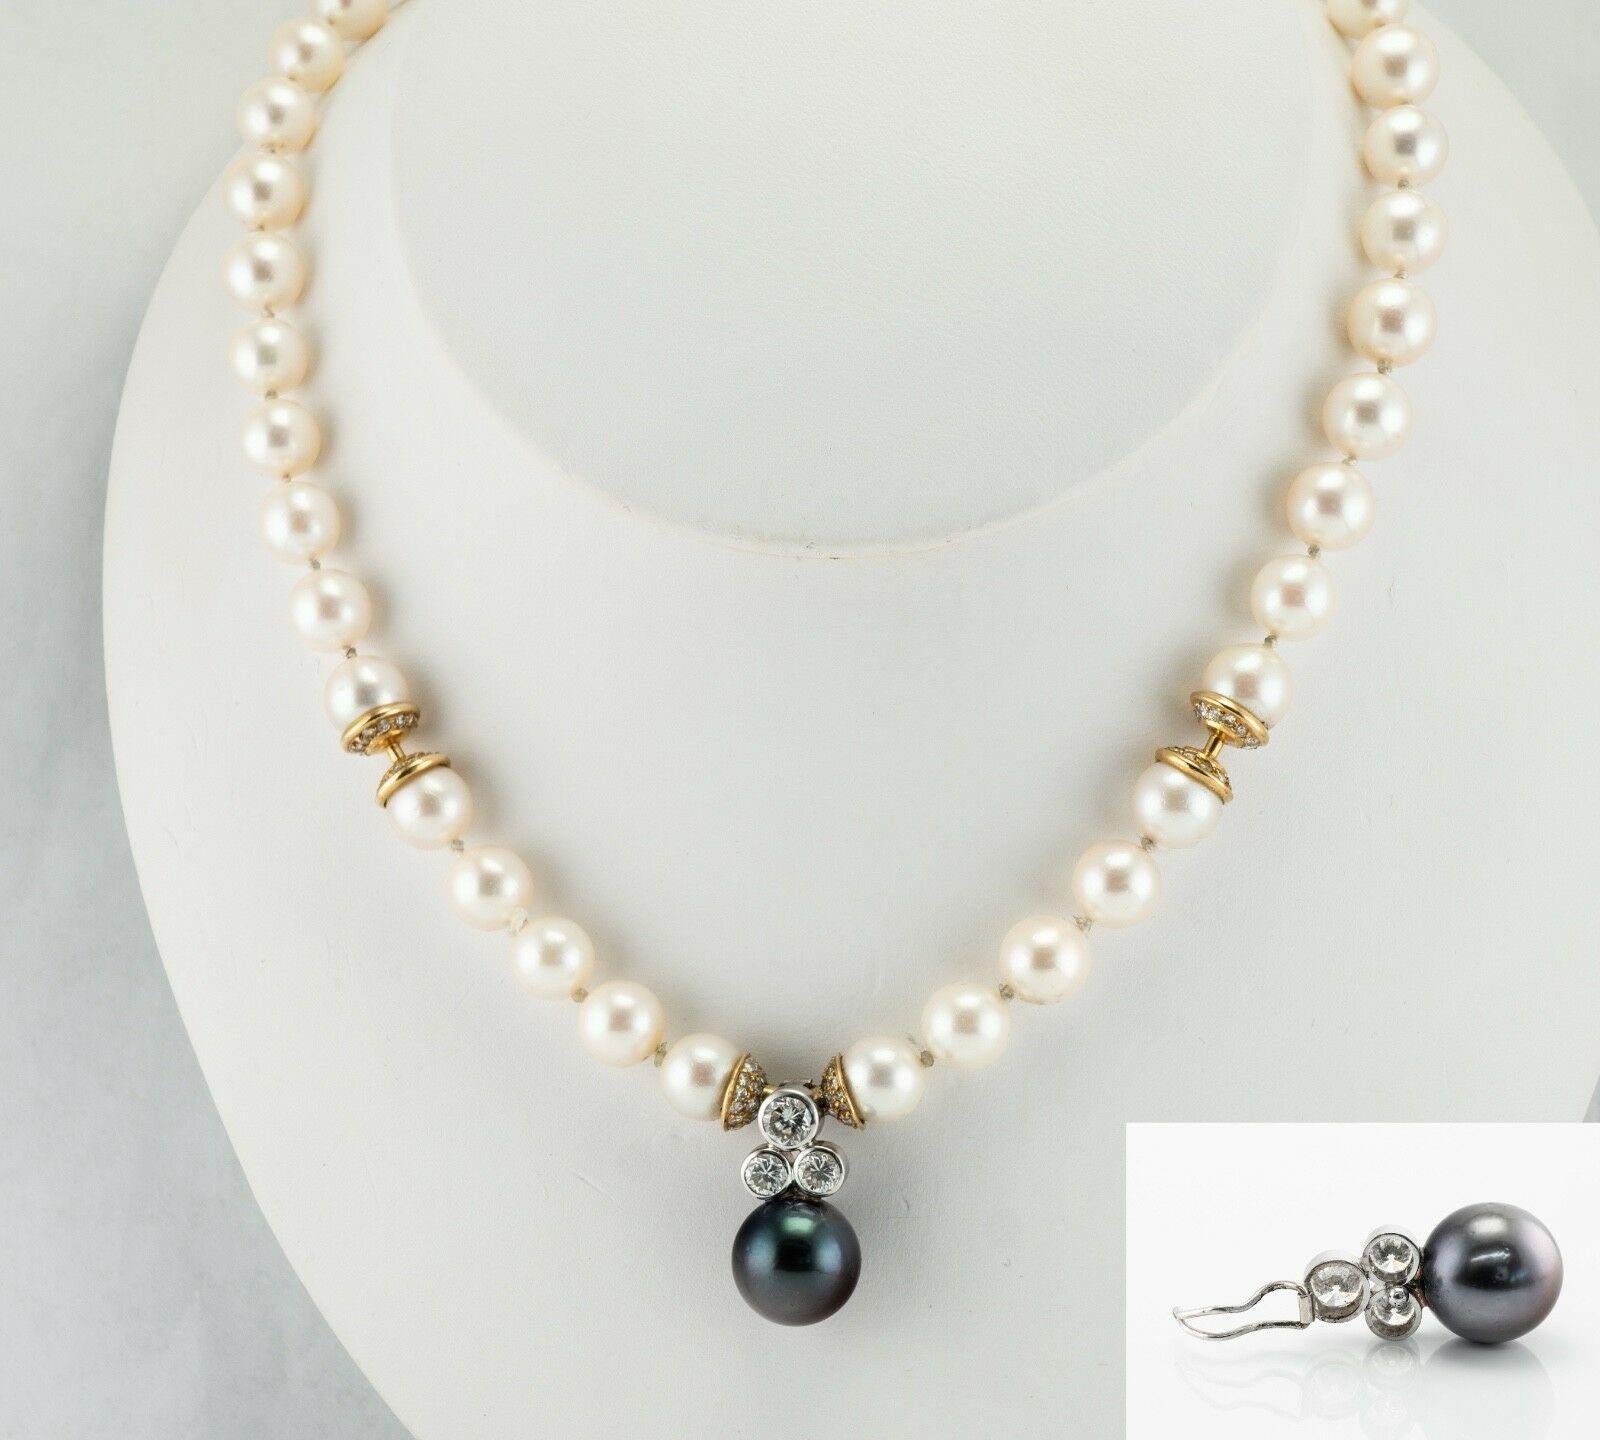 Diamond Akoya & Black Tahitian Pearl Necklace 18K Gold with Enhancer

This gorgeous vintage necklace is made with fine genuine cultured Akoya Pearls, black Tahitian pearl and set in solid 18K Yellow gold for the necklace and 18K White gold for black